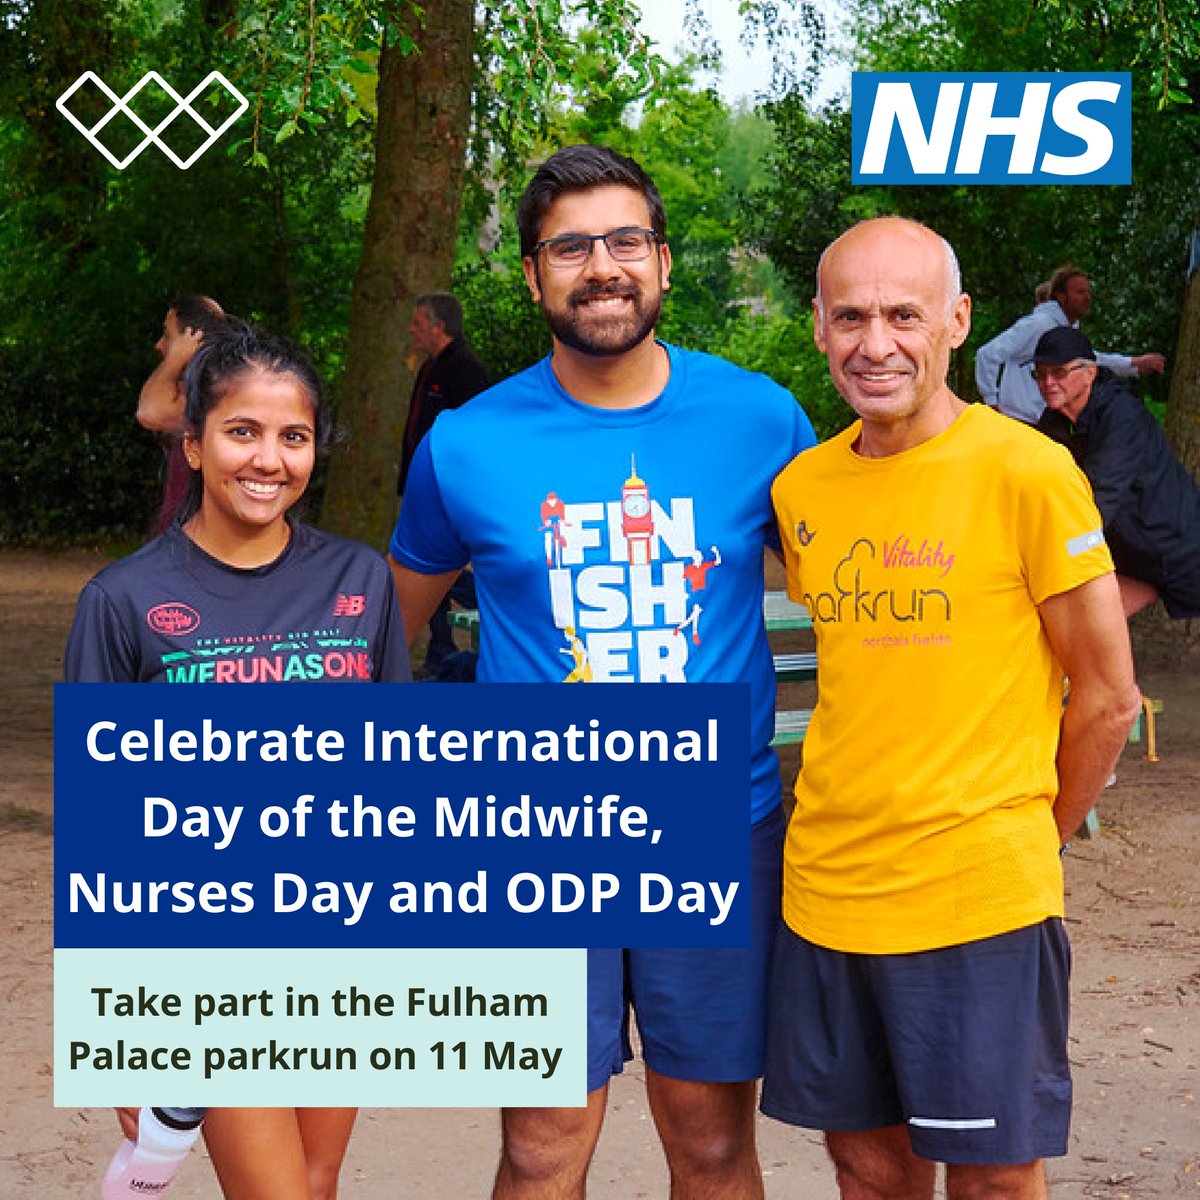 Join us to mark International Day of the Midwife #IDM2024, International Nurses Day #IND2024 and #ODPDay with @parkrunUK. Our #Chelwest team will be taking over the Fulham Palace parkrun on 11 May - we'd love to see you there! Sign up here: ow.ly/H73V50RiUeL